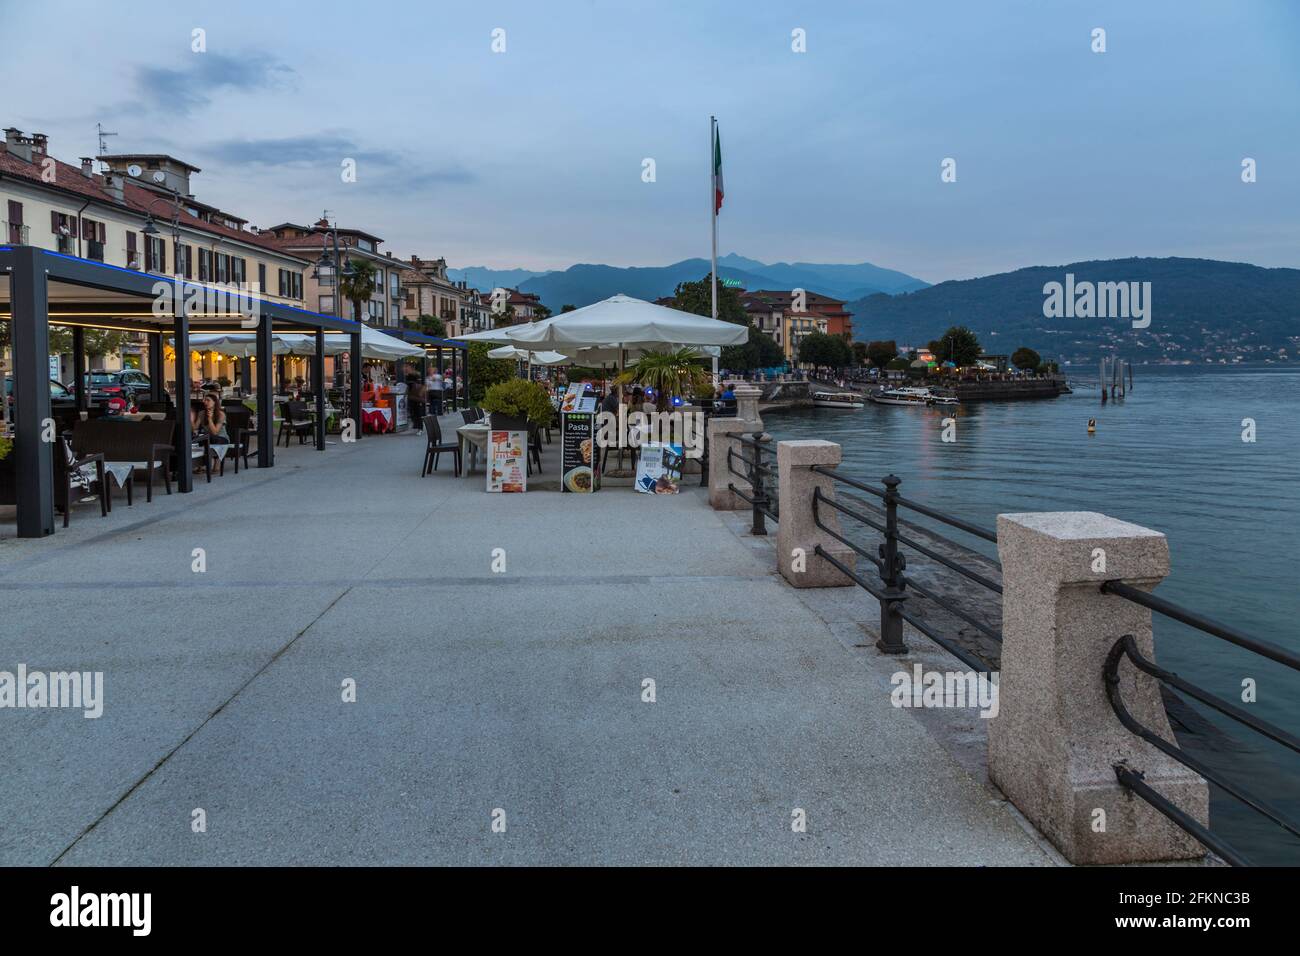 View of lakeside restaurant at dusk in Stresa, Lago Maggiore, Piedmont, Italy, Europe Stock Photo